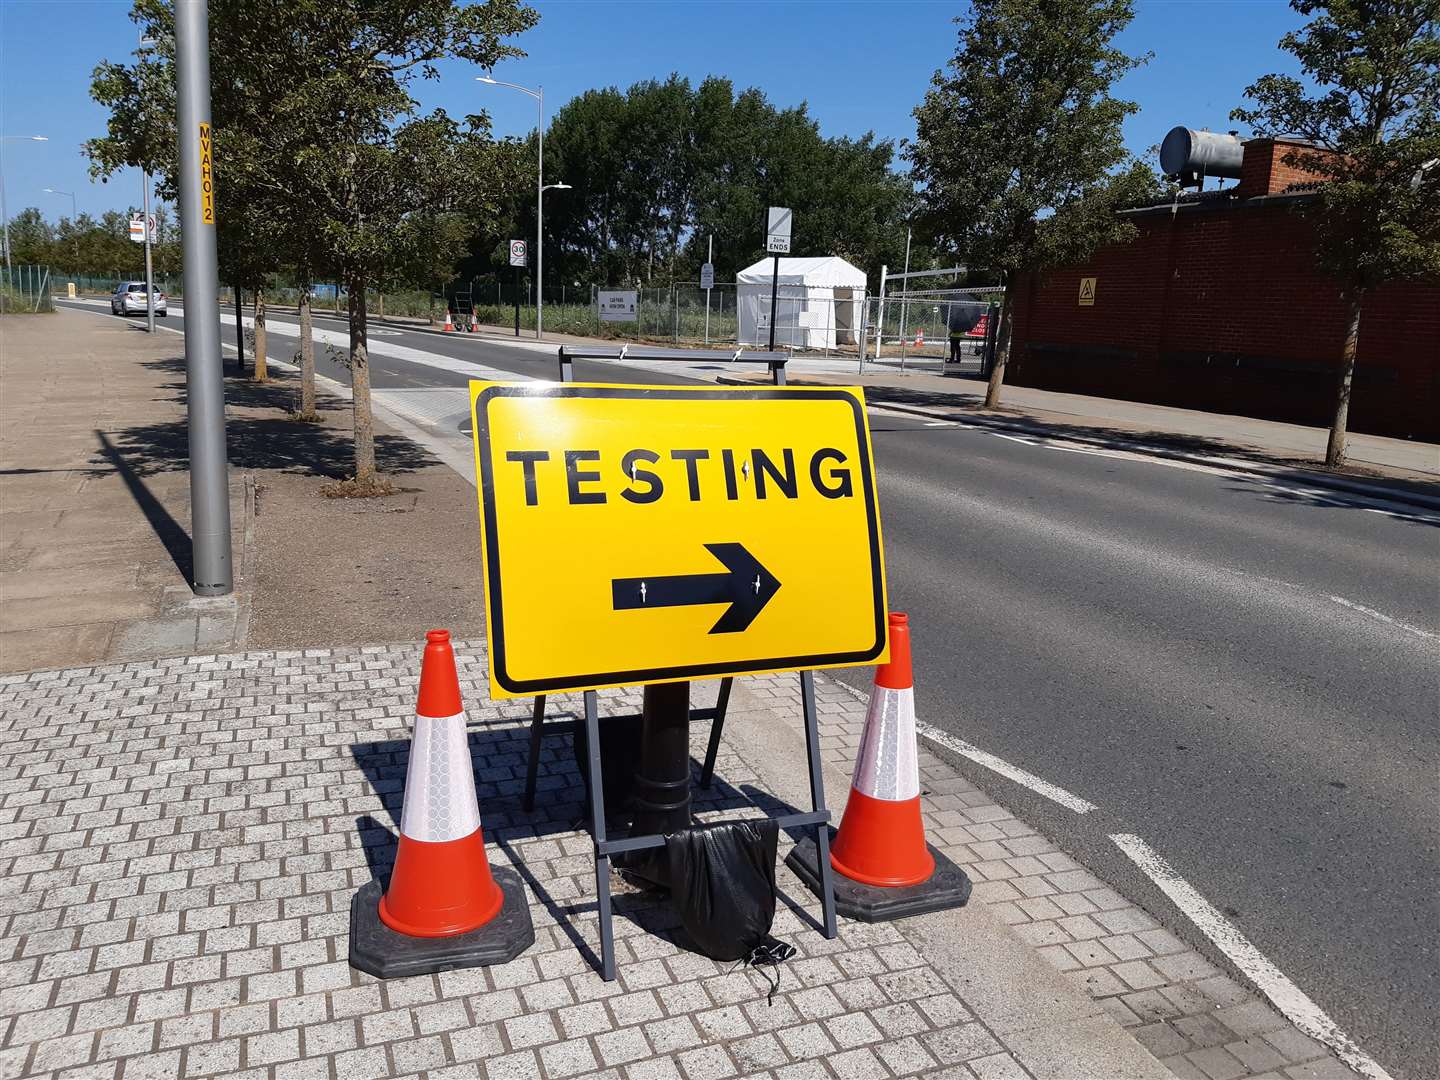 Over 23,000 test have been administered